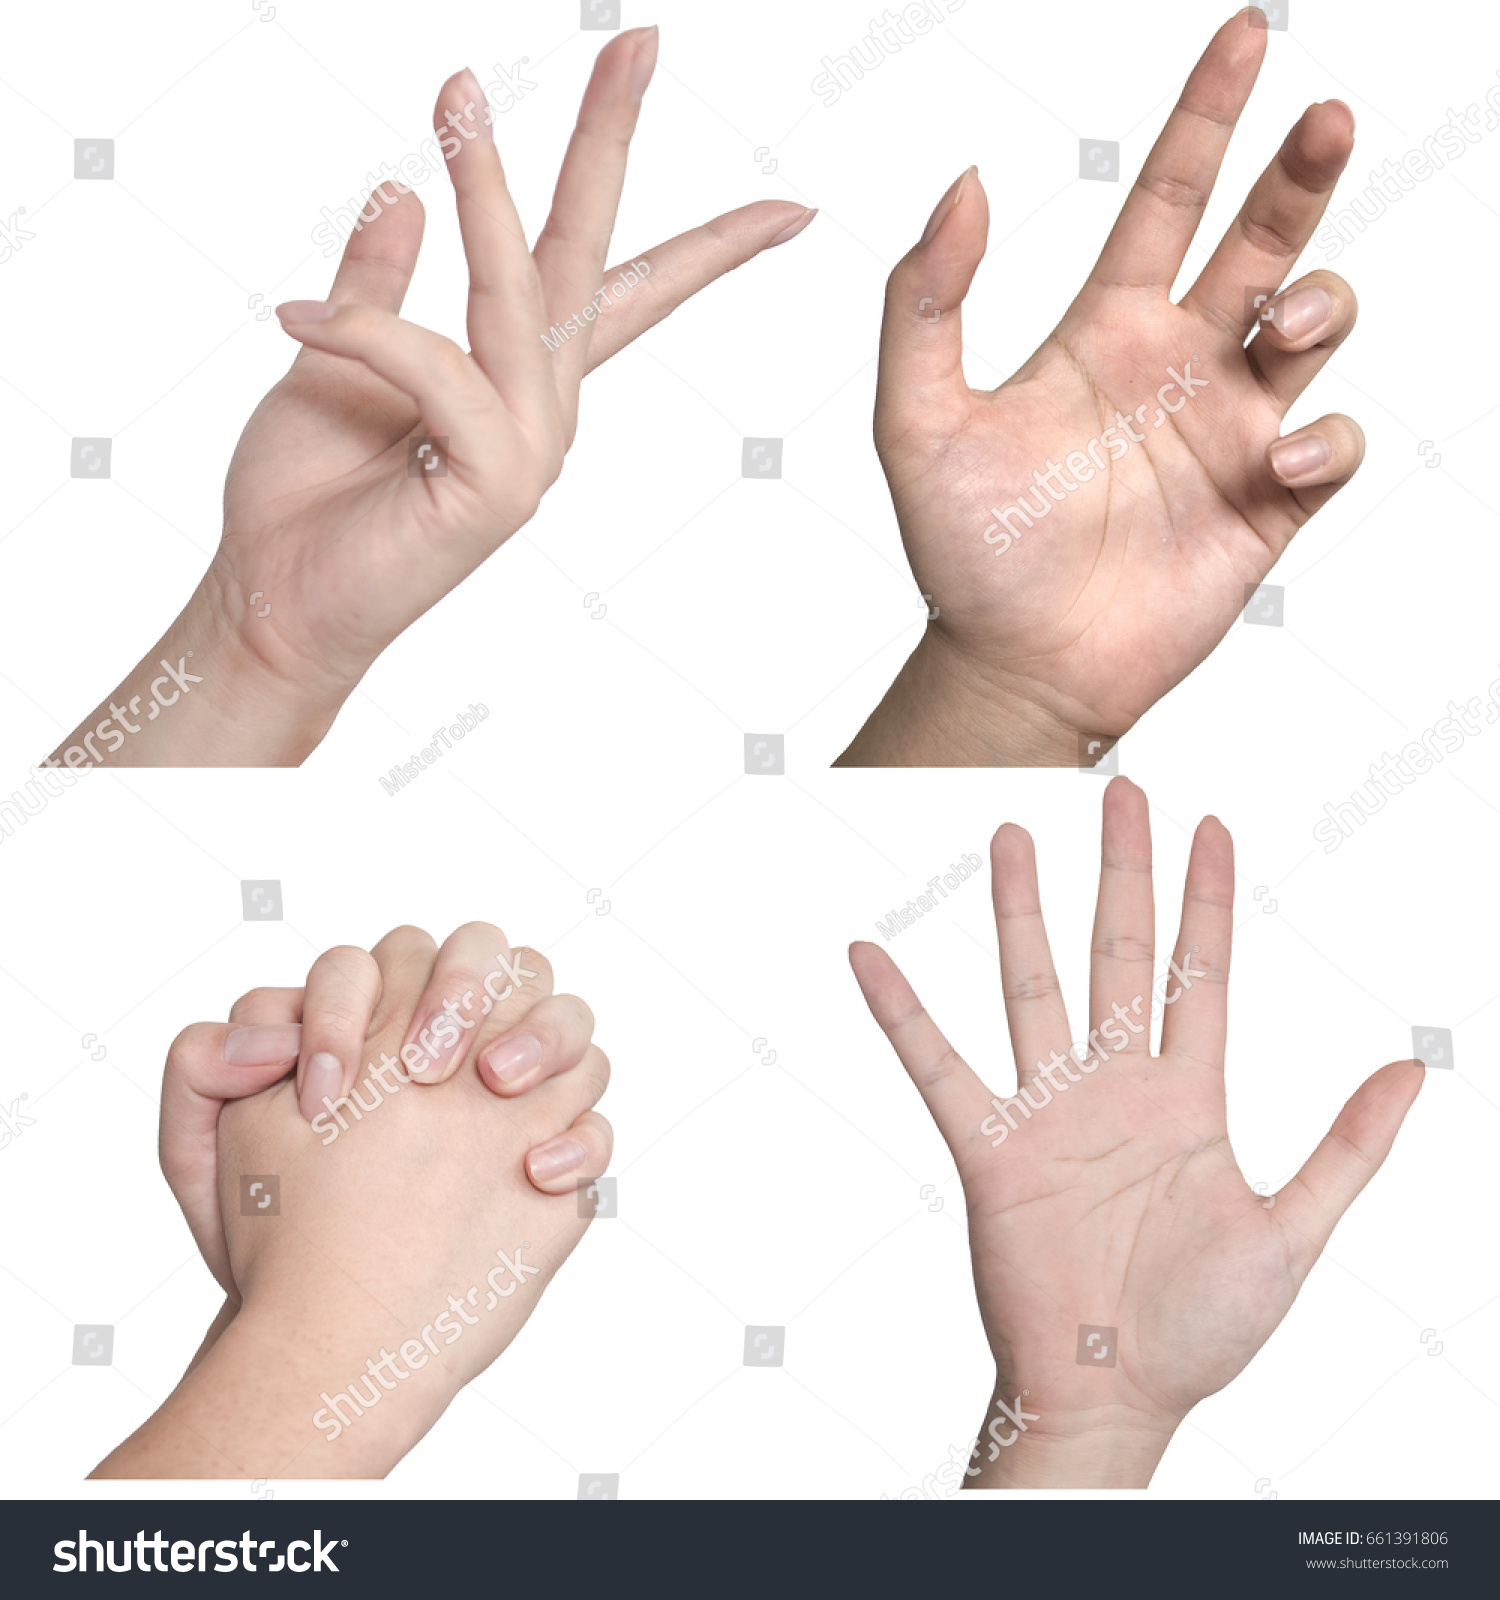 Hand expression